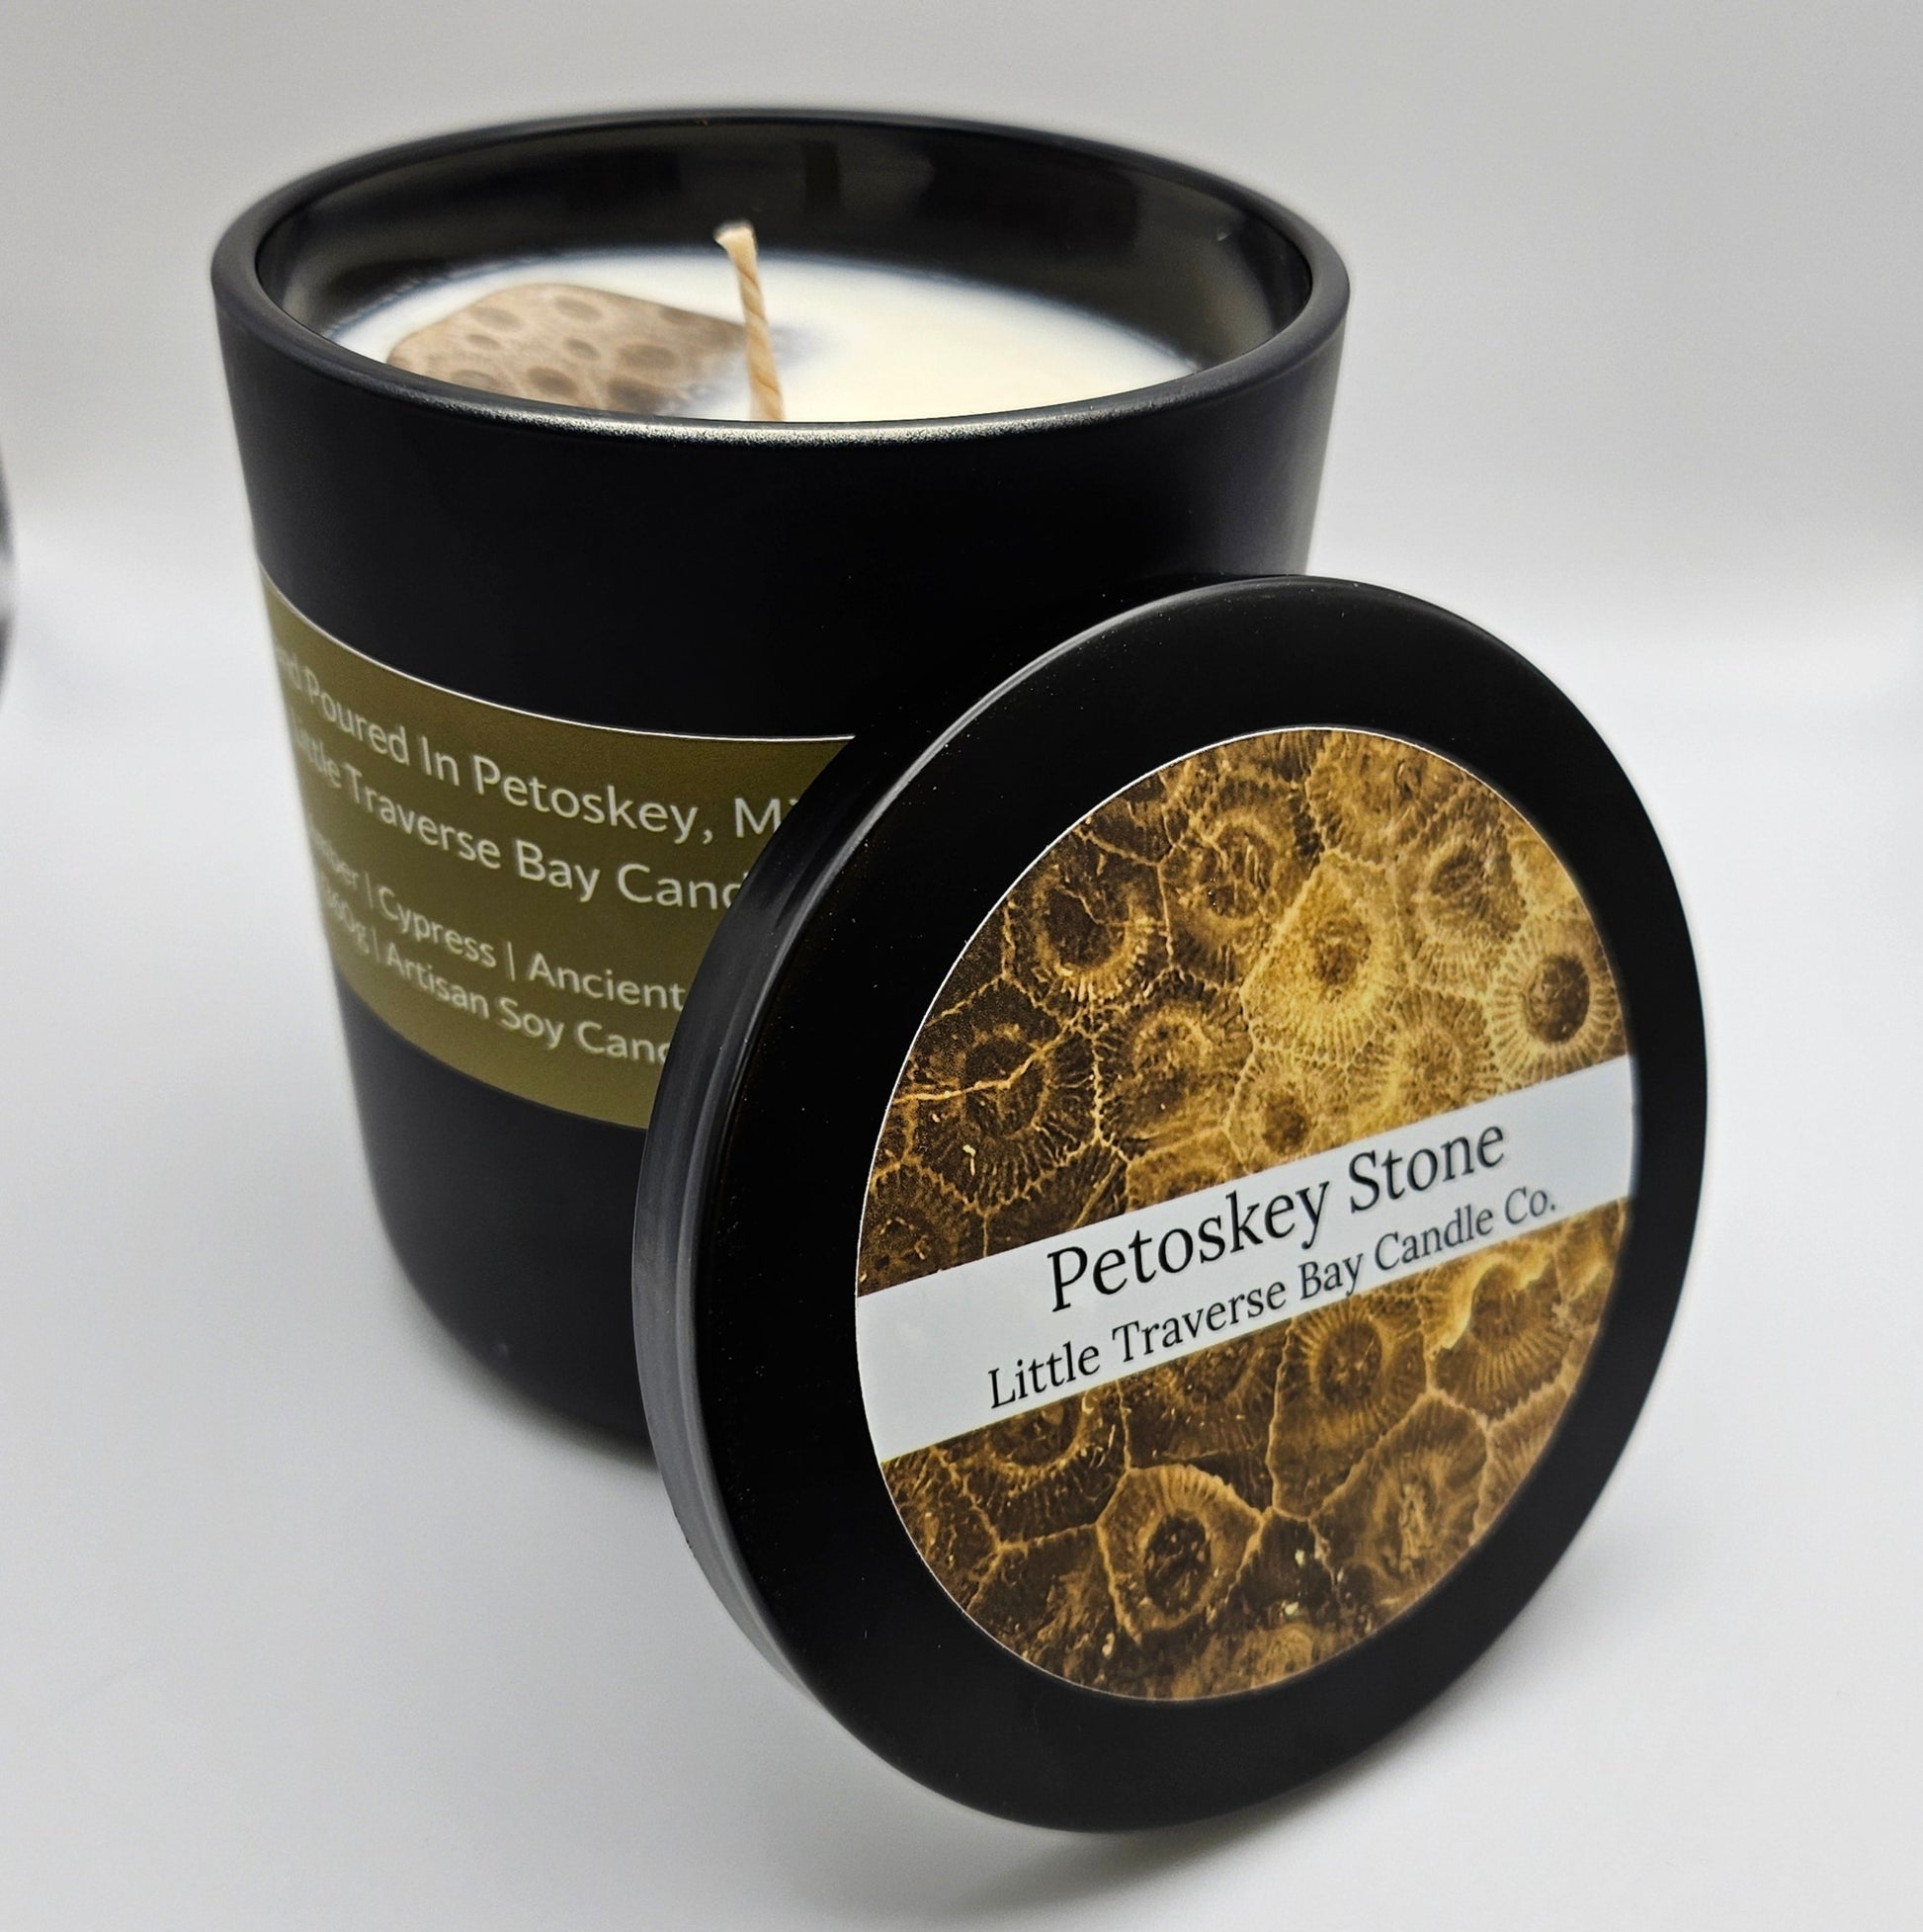 Close up image of the large 12.5 ounce candle with the lid off and leaning up against it with the lid label showing outward. It says Petoskey Stone Little Traverse Bay Candle Co. The inside of the candle shows a sizely petoskey stone with a lovely pattern embedded into the top of the wax with just a bit peeking out. There is a cotton wick in the center, ready for burning.